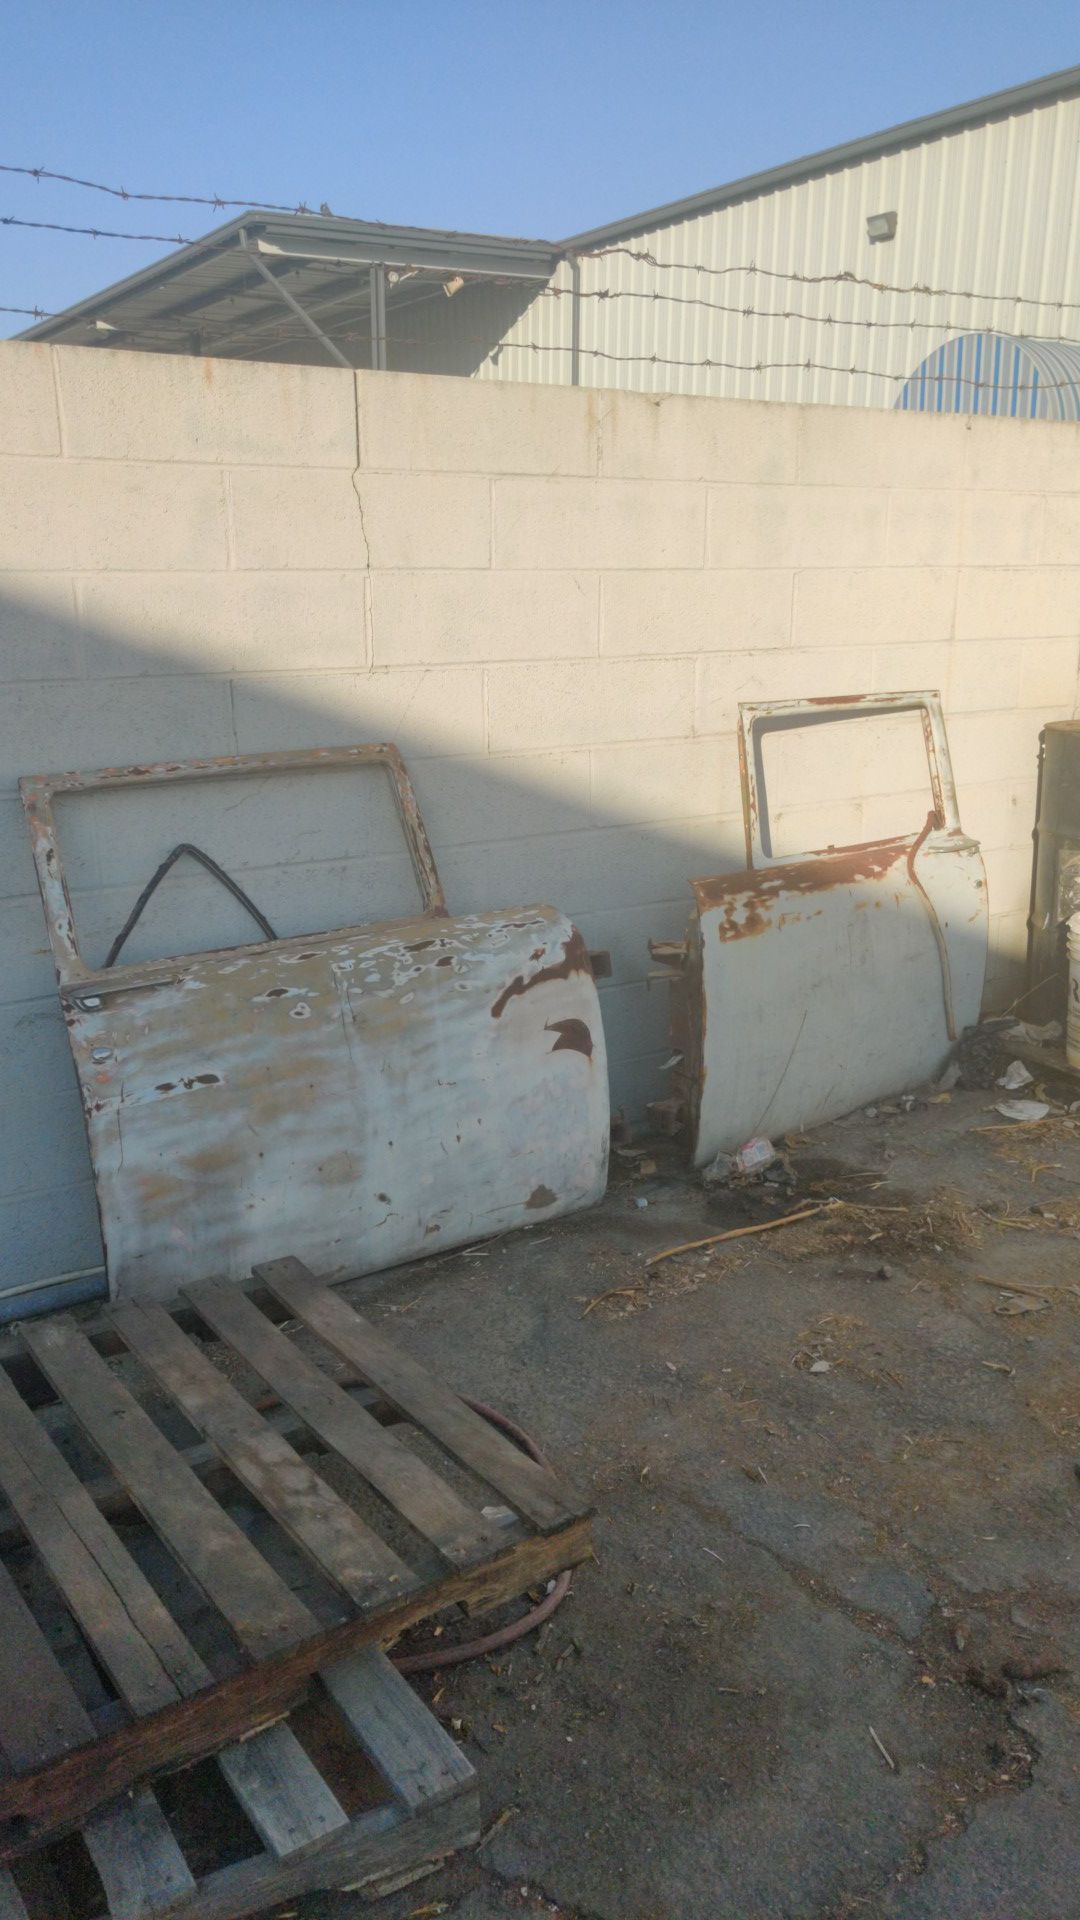 Old chevy door's don't know what there worth but not trying to get rich first person with a decent offer they're theirs